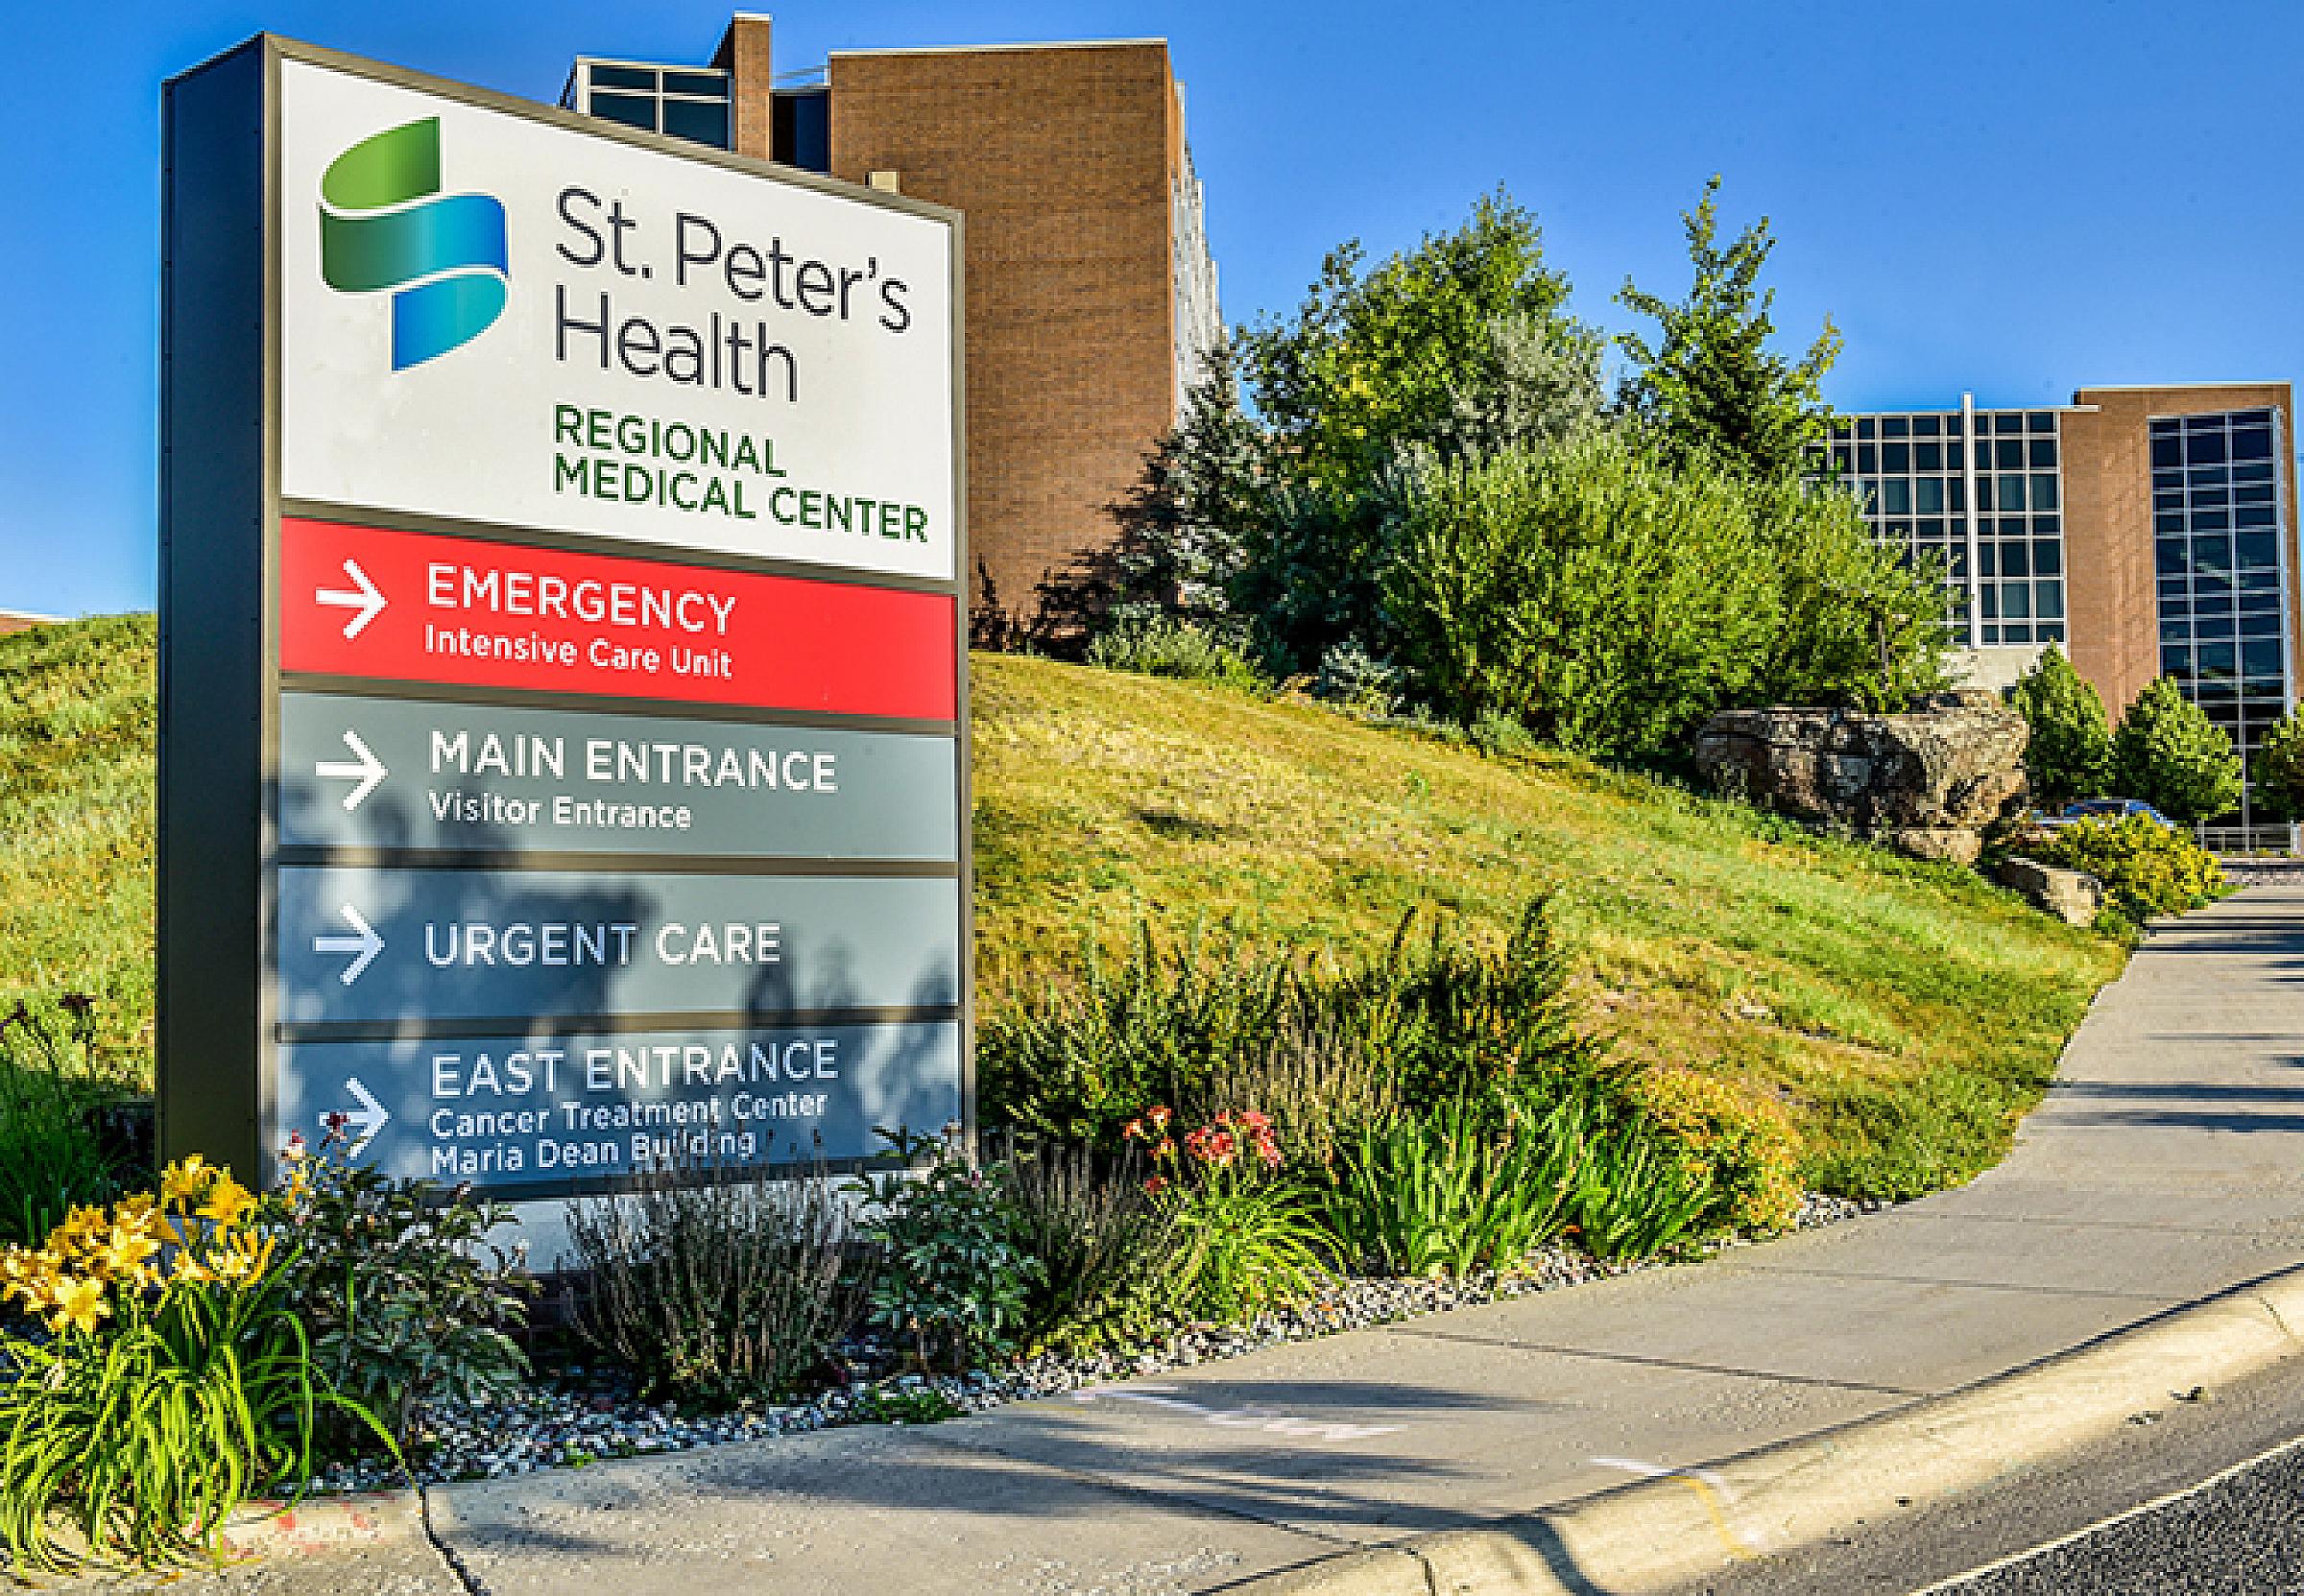 St. Peters Health Entrance Sign Outside